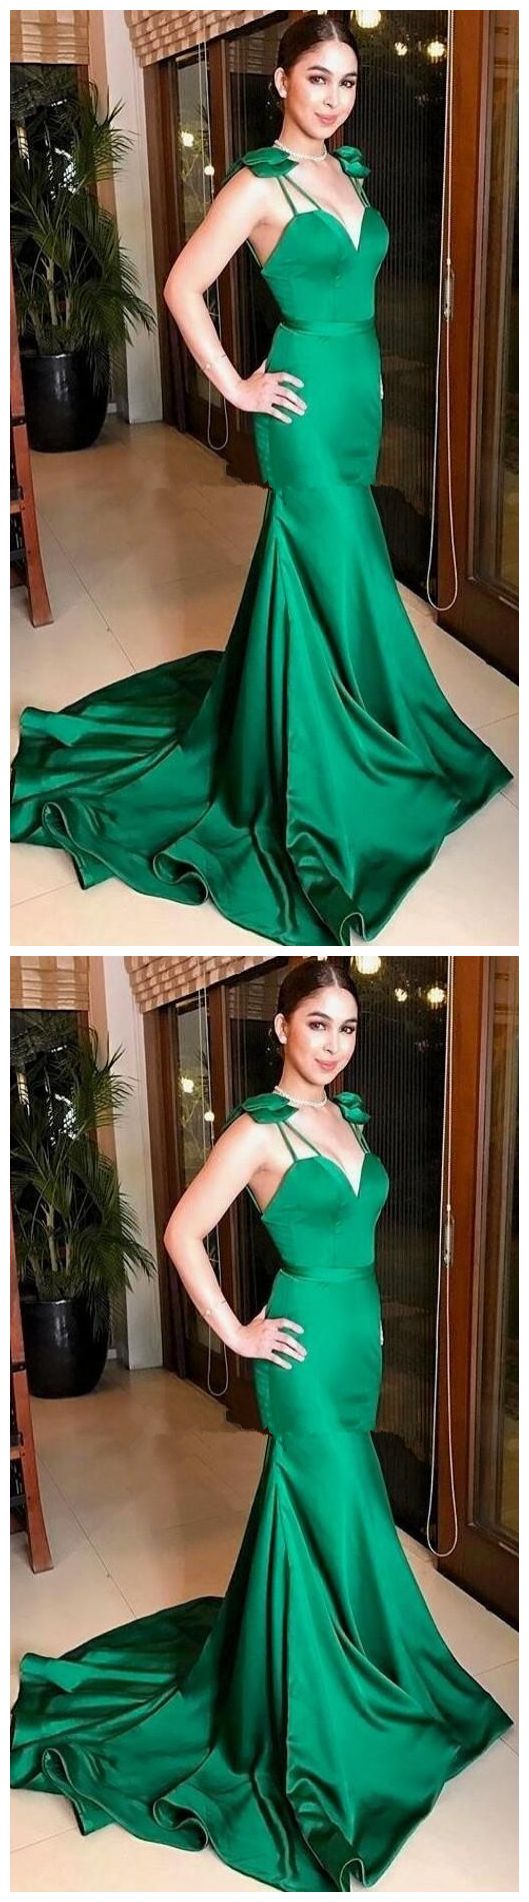 New Green Mermaid Prom Dresses Spaghetti Bow Sweep Train Long Formal Evening Party Gowns  cg3963